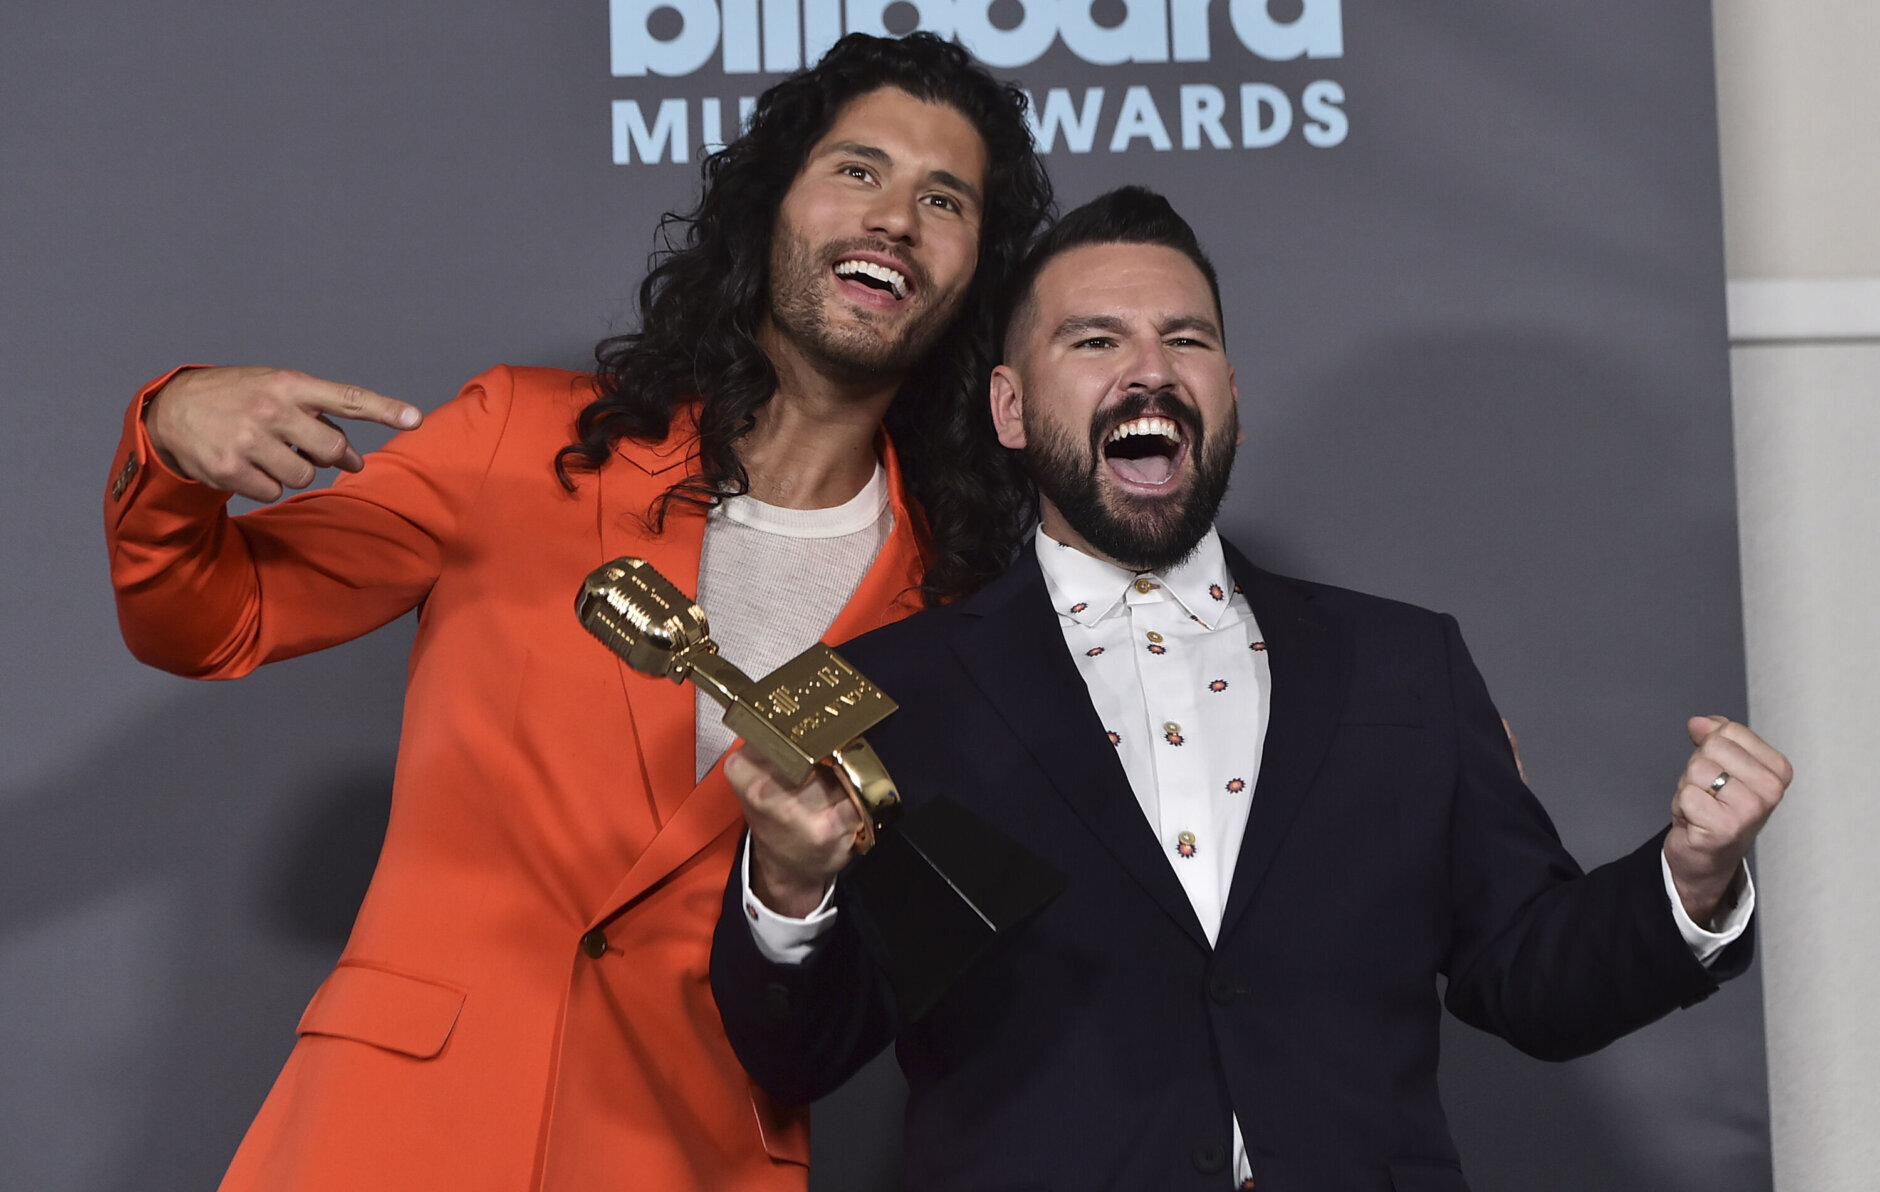 Dan Smyers, left, and Shay Mooney of Dan + Shay pose in the press room with the award for top country duo or group at the Billboard Music Awards on Sunday, May 15, 2022, at the MGM Grand Garden Arena in Las Vegas. (Photo by Jordan Strauss/Invision/AP)